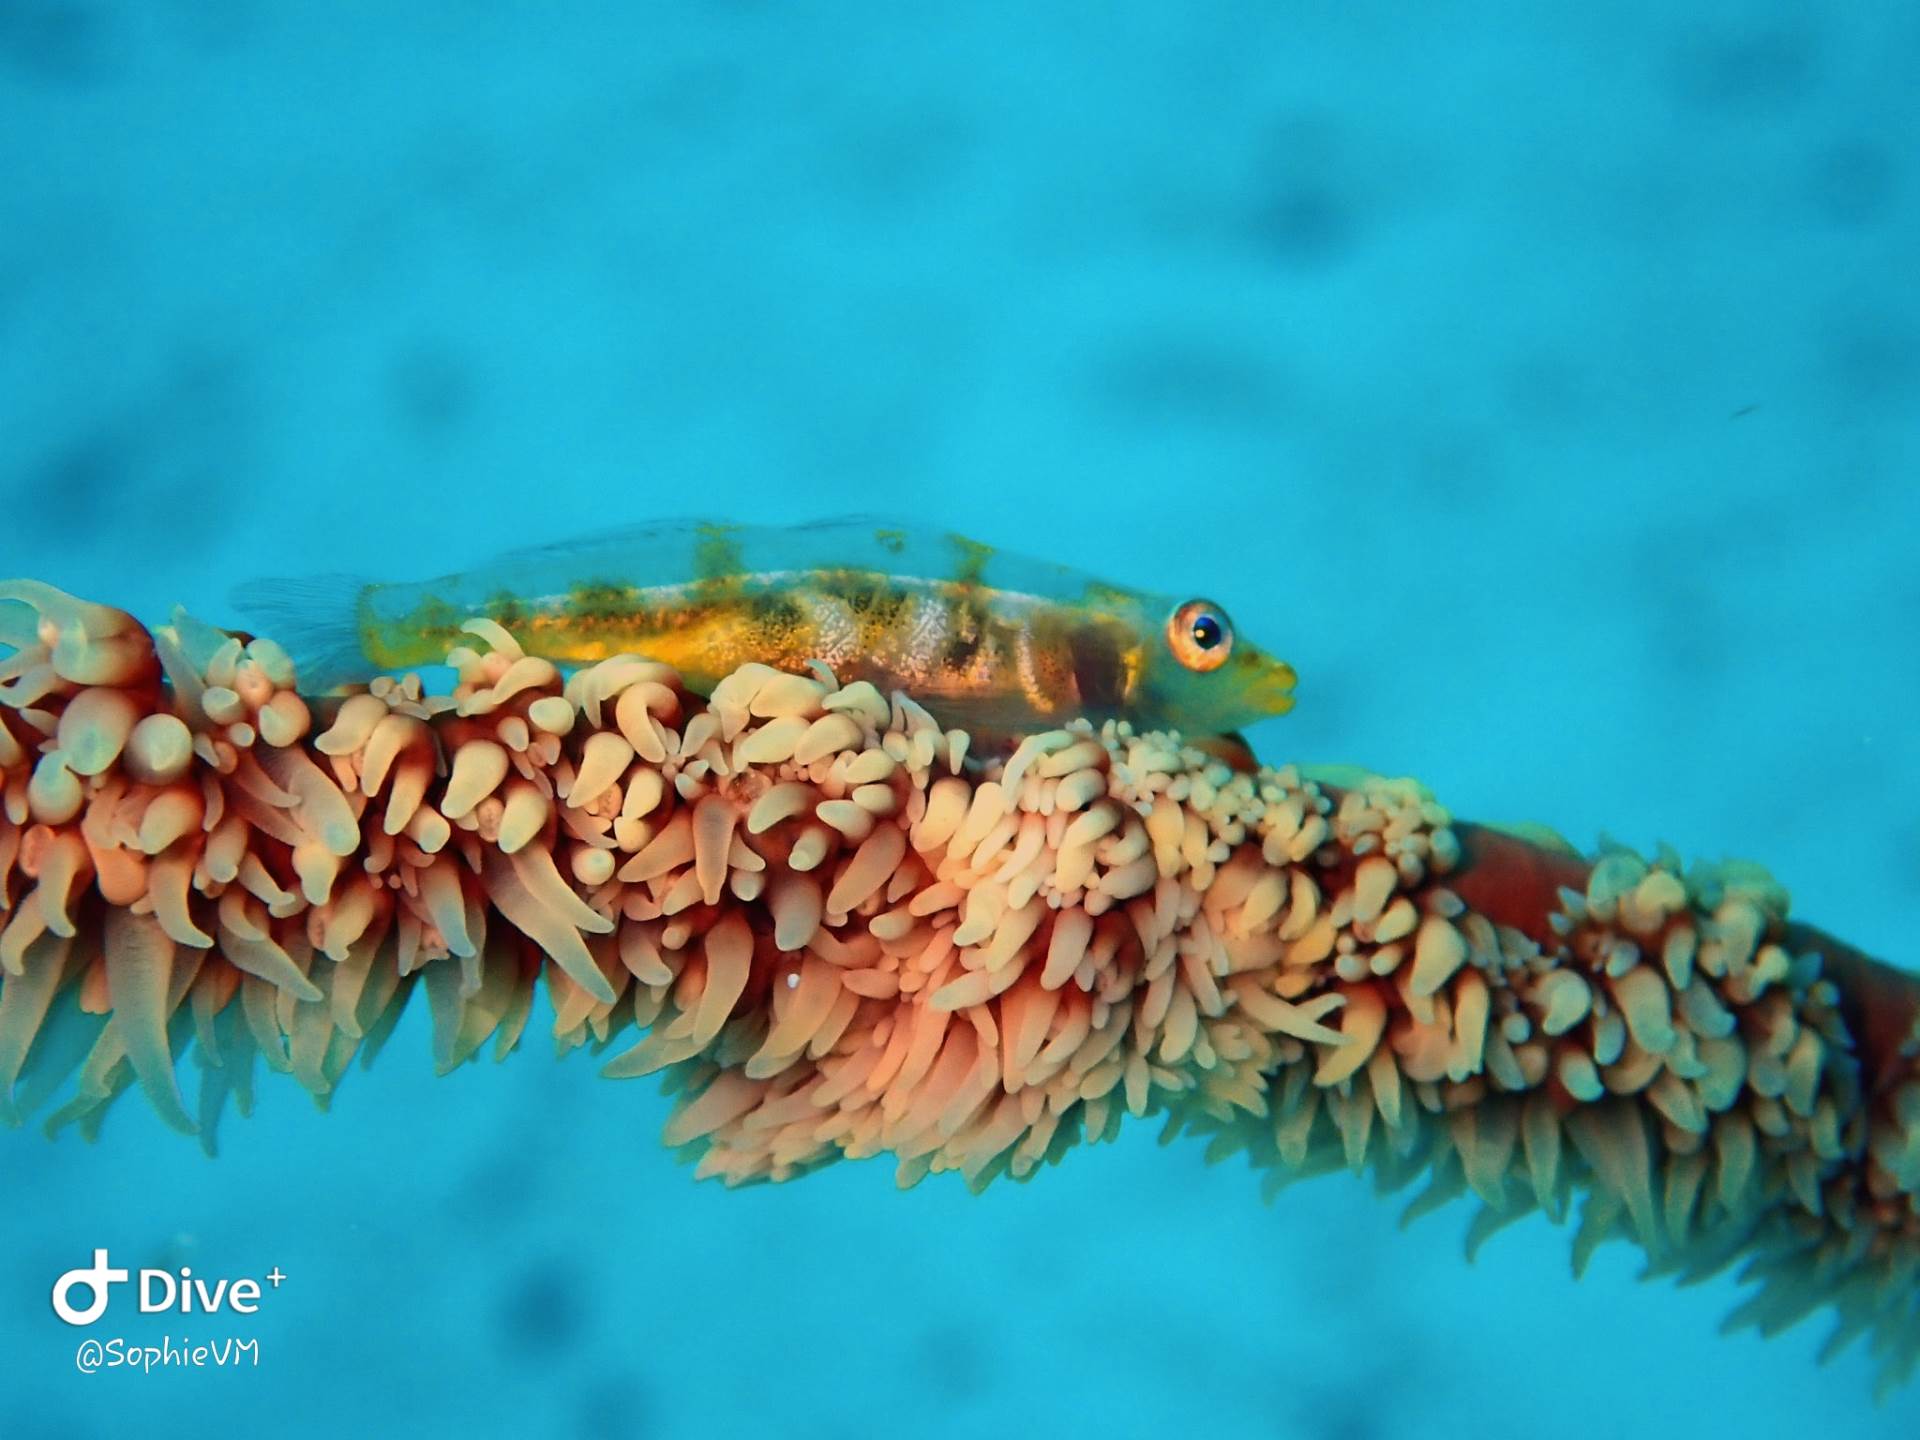 Whip coral goby. Now you see them, now you don't! 